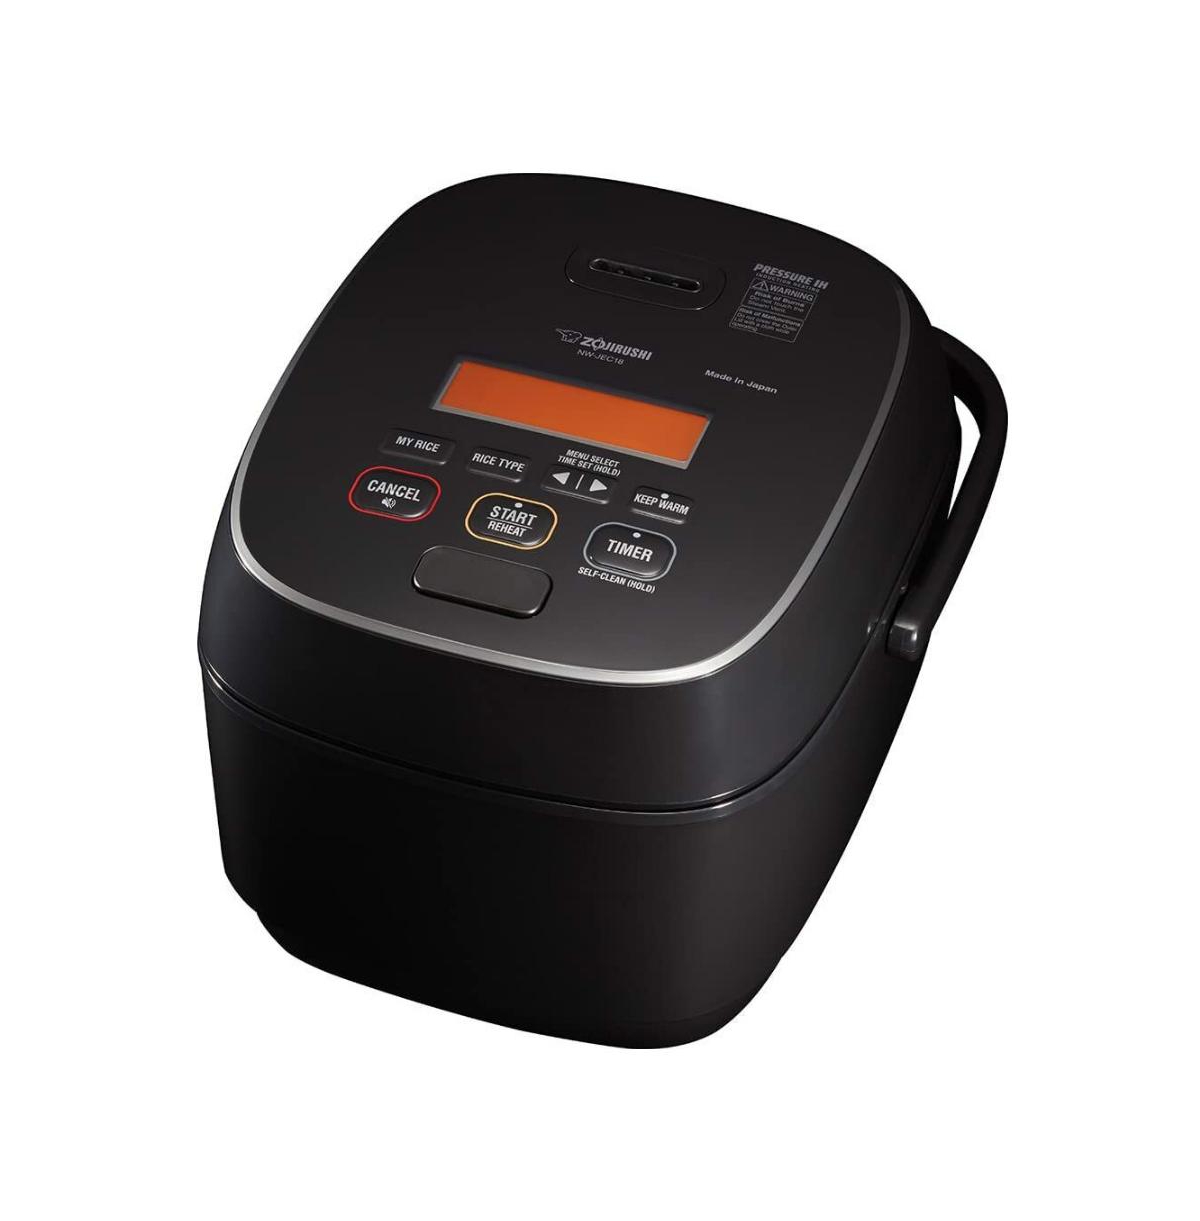 Nw-Jec18Ba Pressure Induction Heating Rice Cooker (10-Cup) - Black